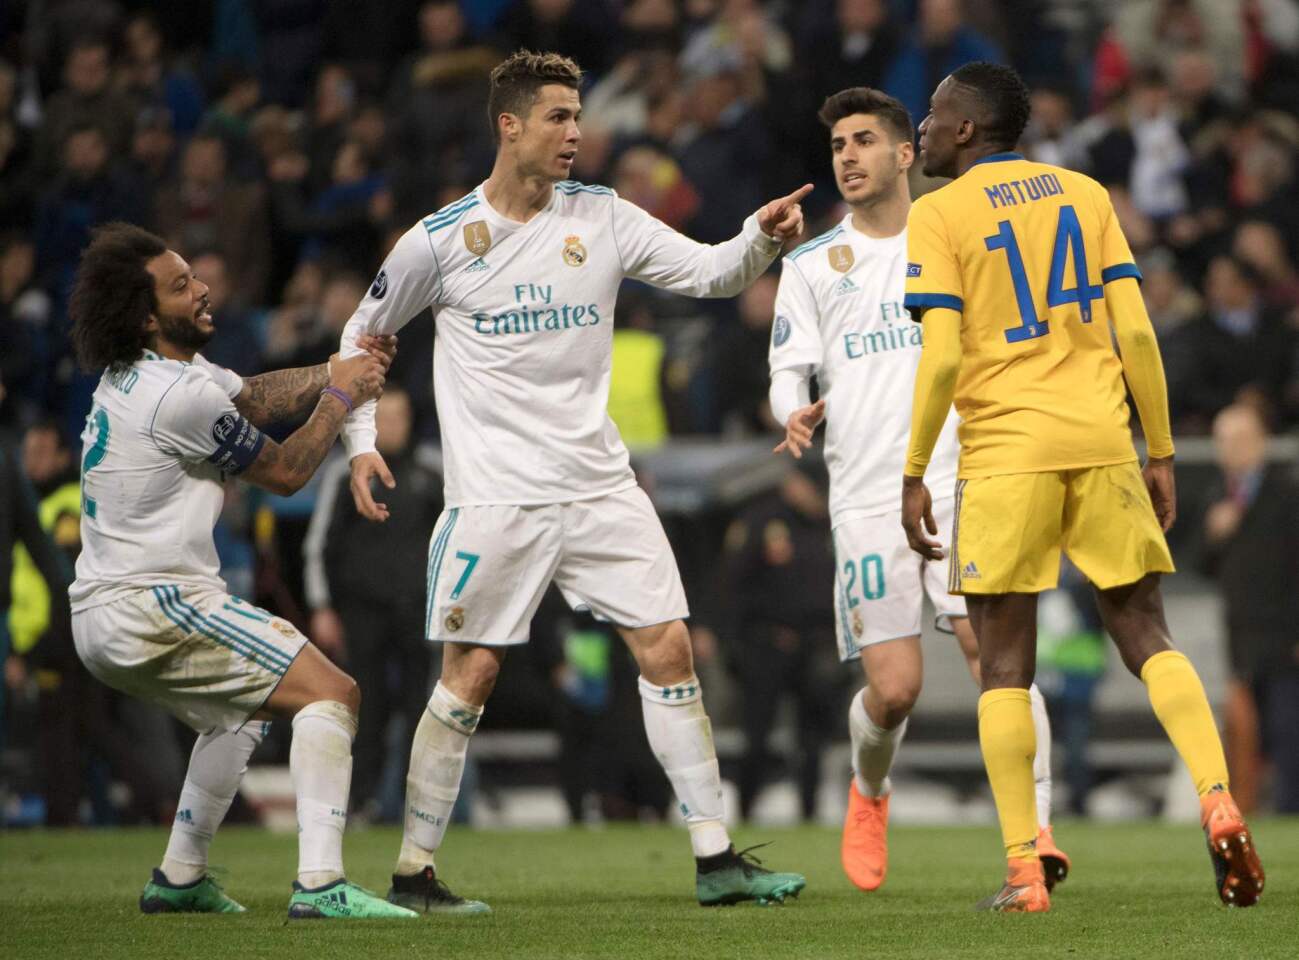 Real Madrid's Portuguese forward Cristiano Ronaldo (2L) confronts Juventus' French midfielder Blaise Matuidi (R) during the UEFA Champions League quarter-final second leg football match between Real Madrid CF and Juventus FC at the Santiago Bernabeu stadium in Madrid on April 11, 2018. / AFP PHOTO / CURTO DE LA TORRECURTO DE LA TORRE/AFP/Getty Images ** OUTS - ELSENT, FPG, CM - OUTS * NM, PH, VA if sourced by CT, LA or MoD **